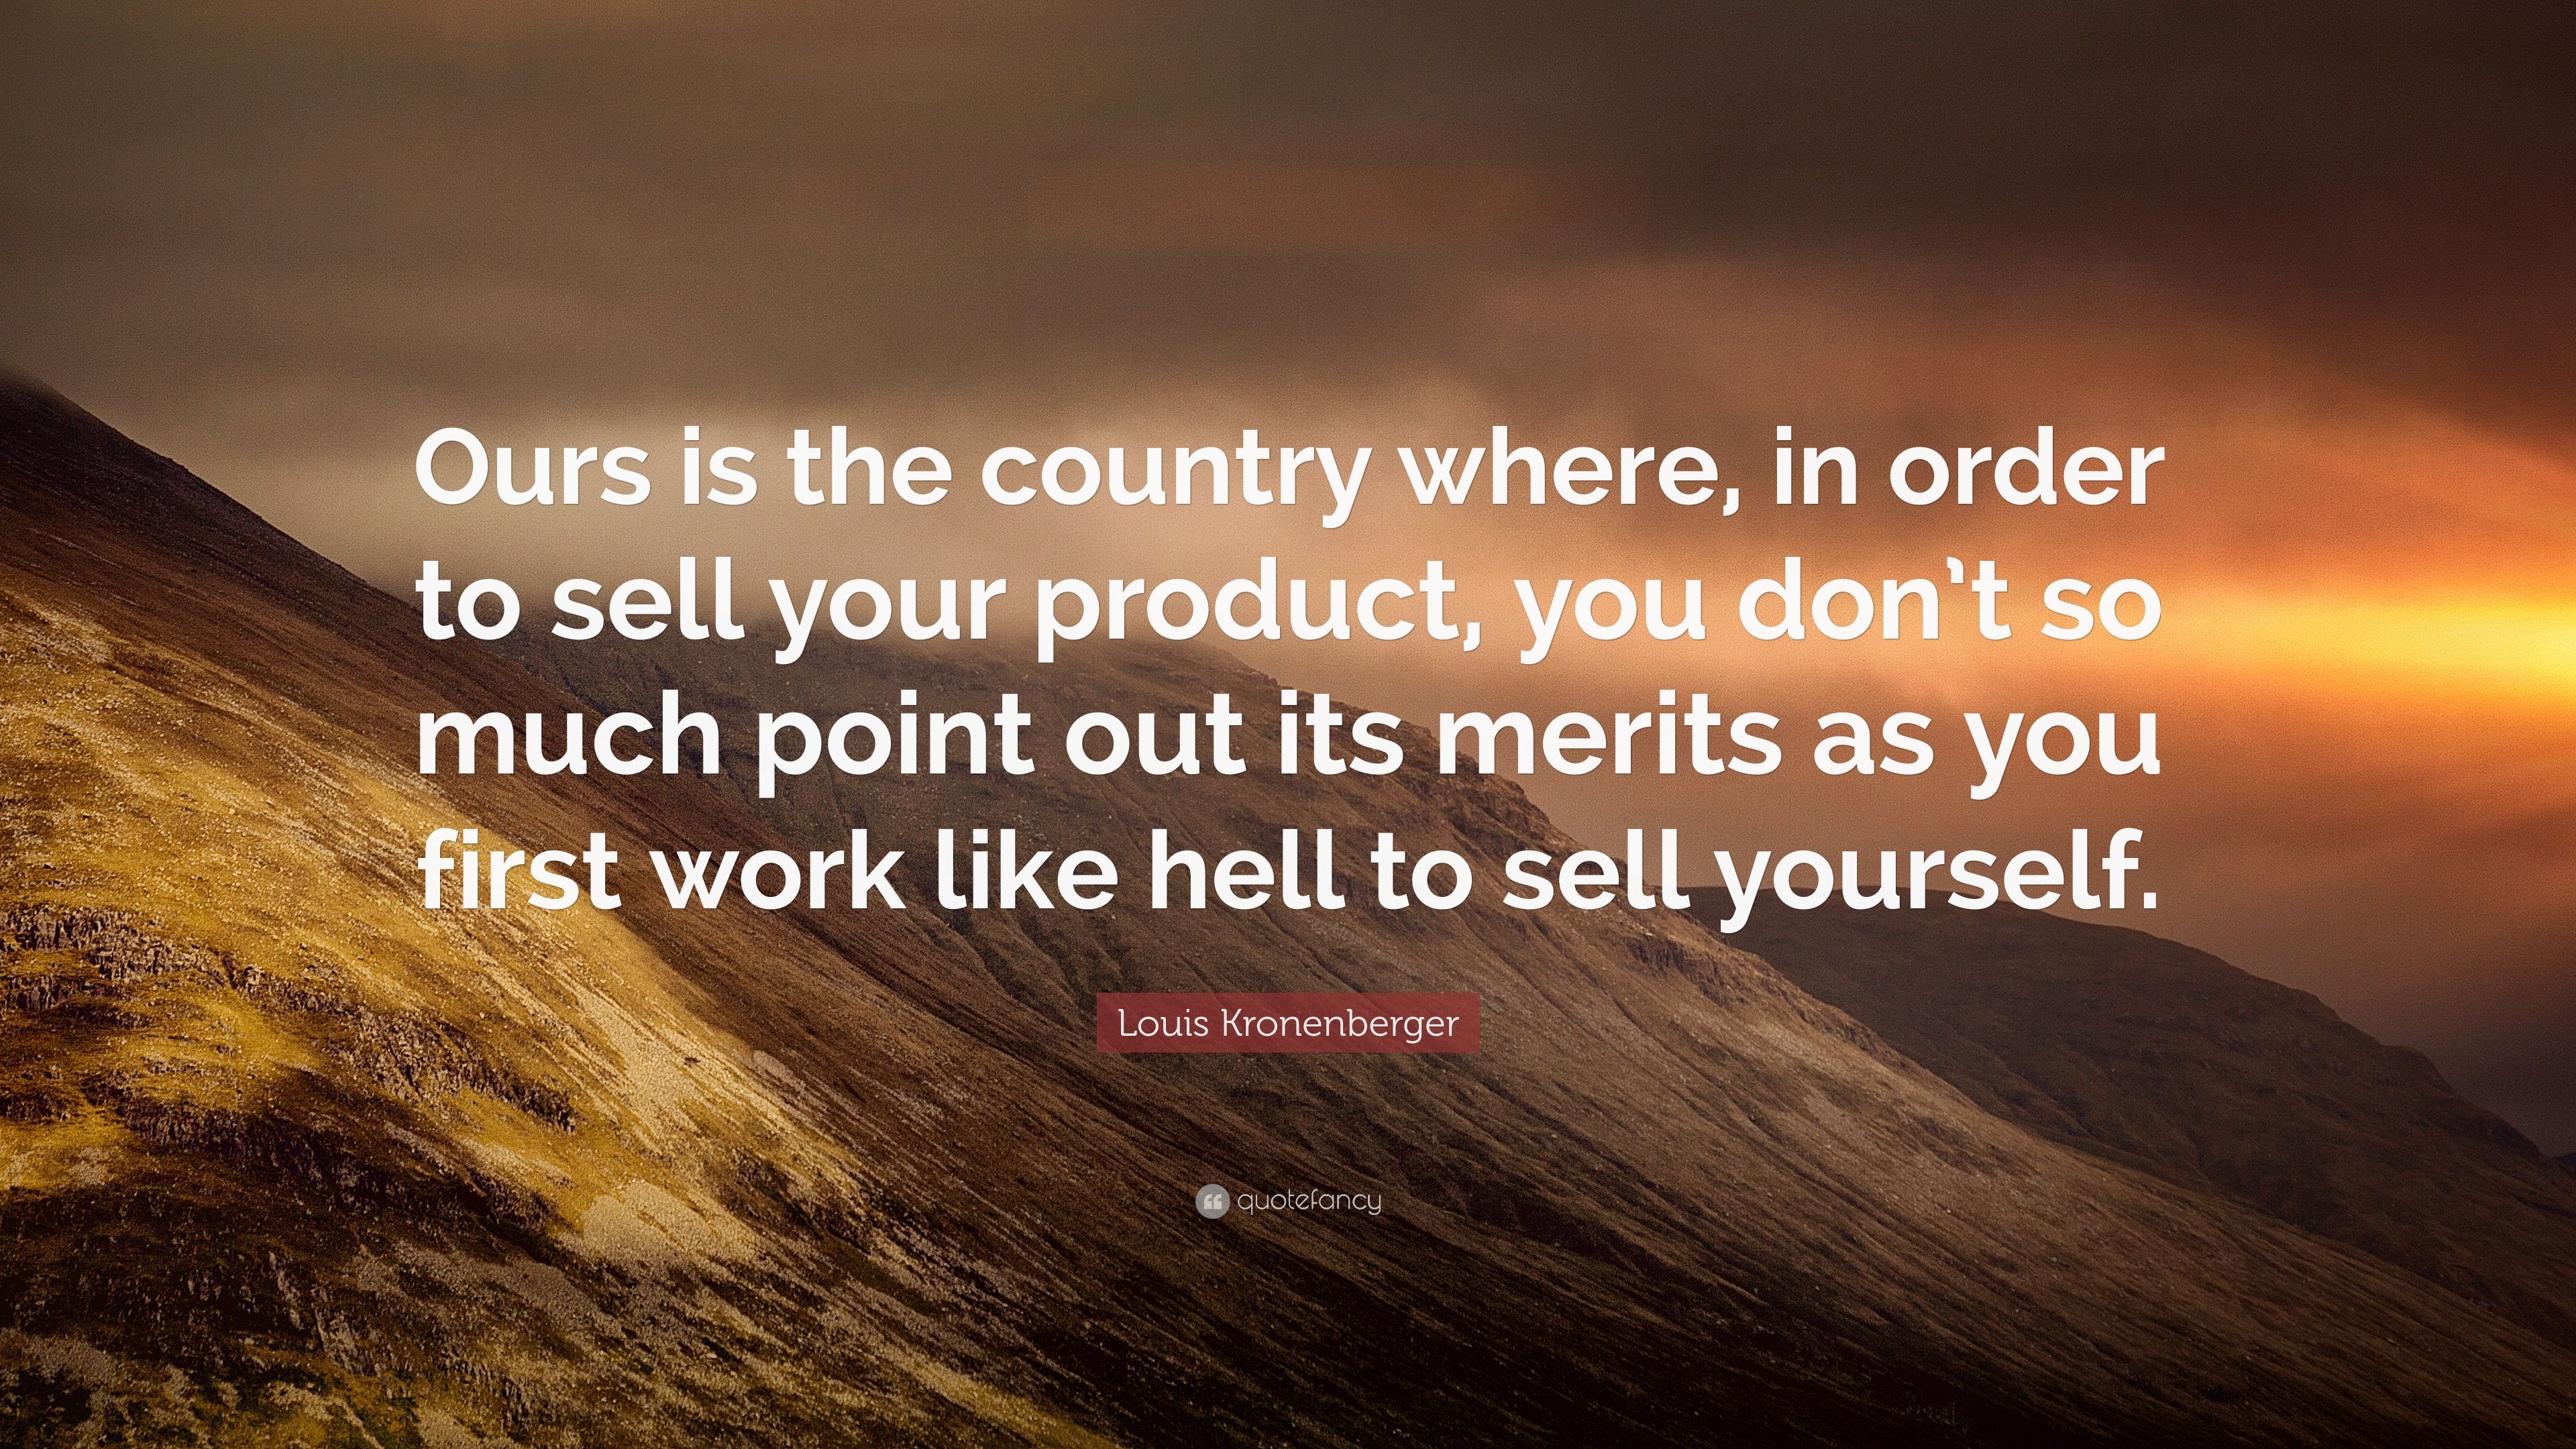 Louis Kronenberger Quote: “Ours is the country where, in order to sell your product, you don't so much point out its merits as you first work like .” (7 wallpaper)